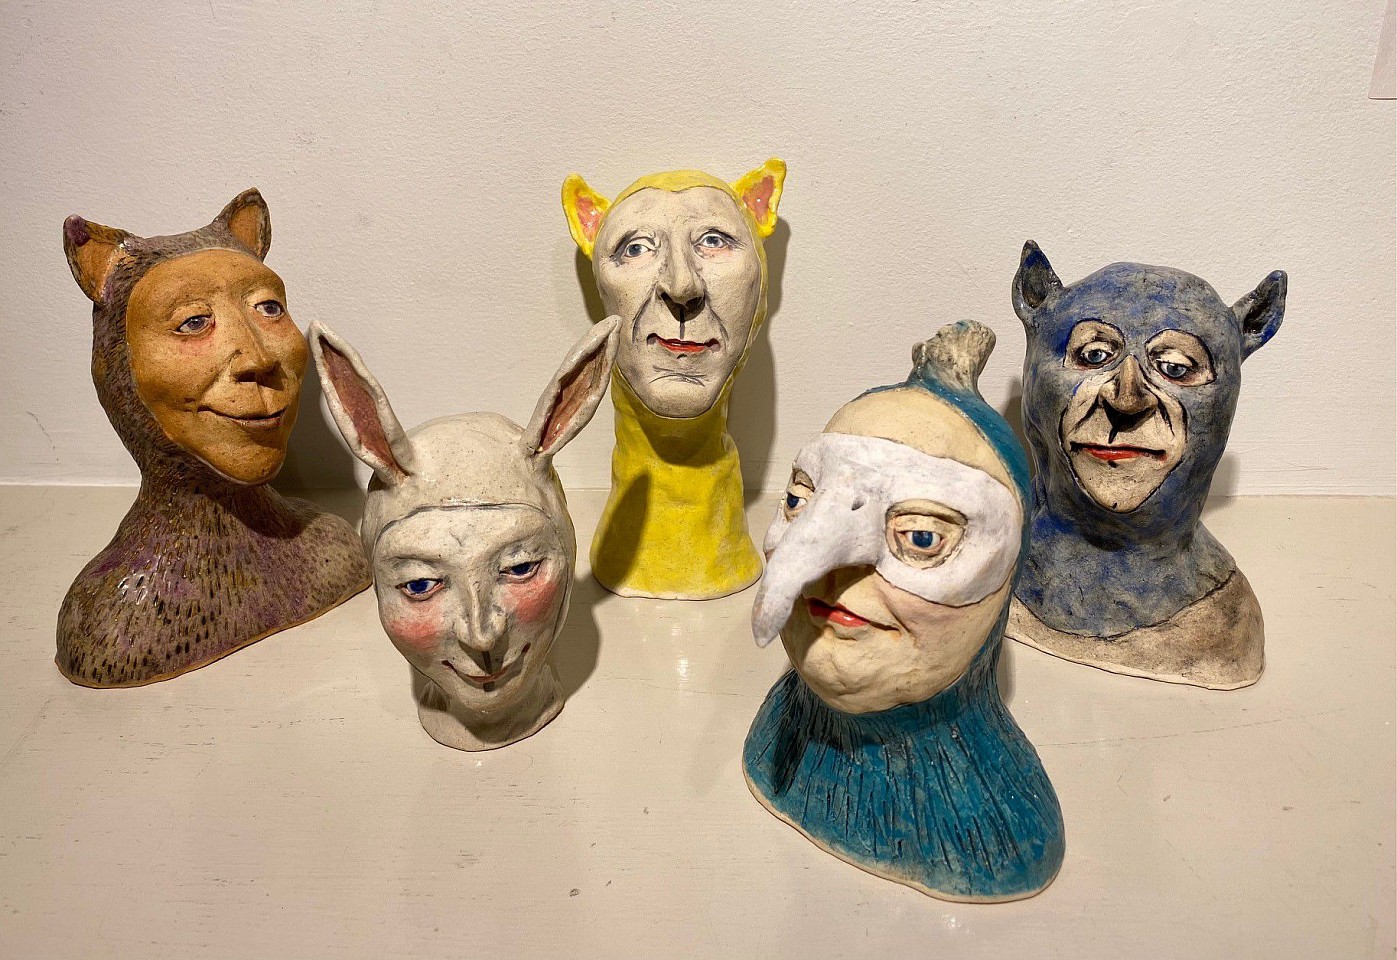 Jeanine Pennell, Characters Group 8
glazed ceramic, 6"" - 8""
JCAC 6292.08
$225